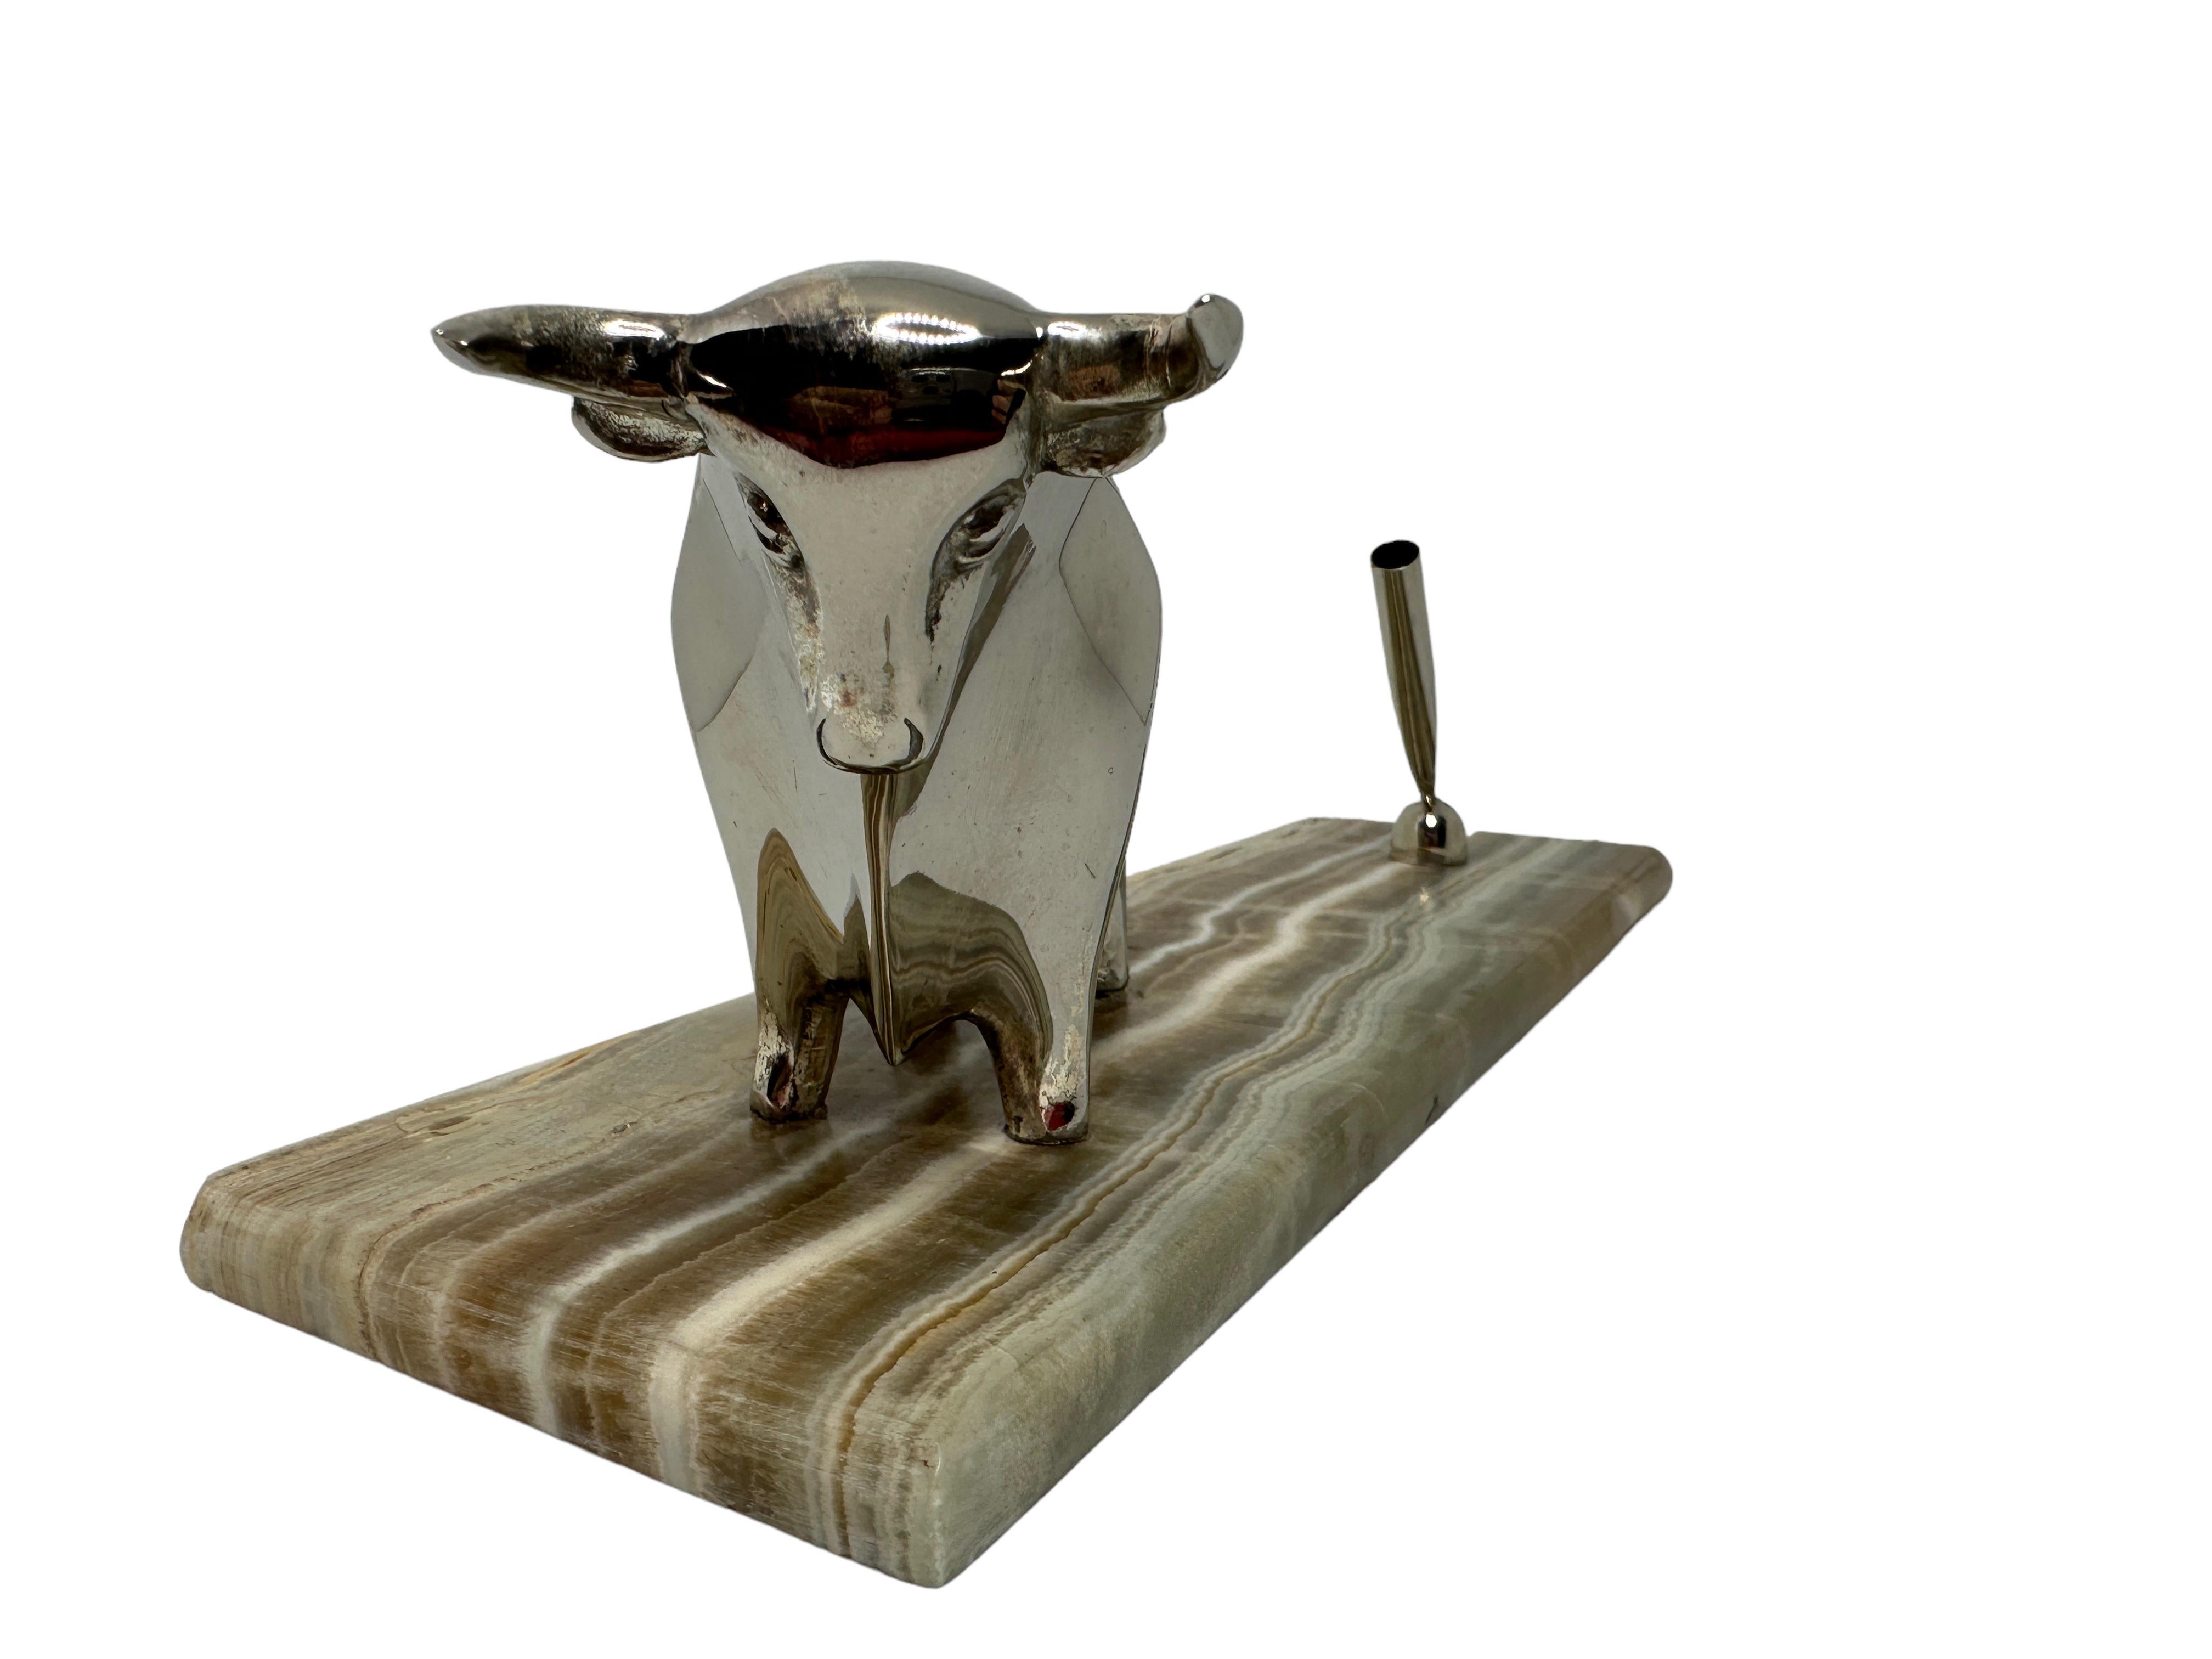 Classic 20th century Bull statue on a marble base with a pen holder. Desktop accessory, made of metal, chrome and marble. Nice addition to your writing desk or just to display in in your room. Found at an estate sale in Modena, Italy.